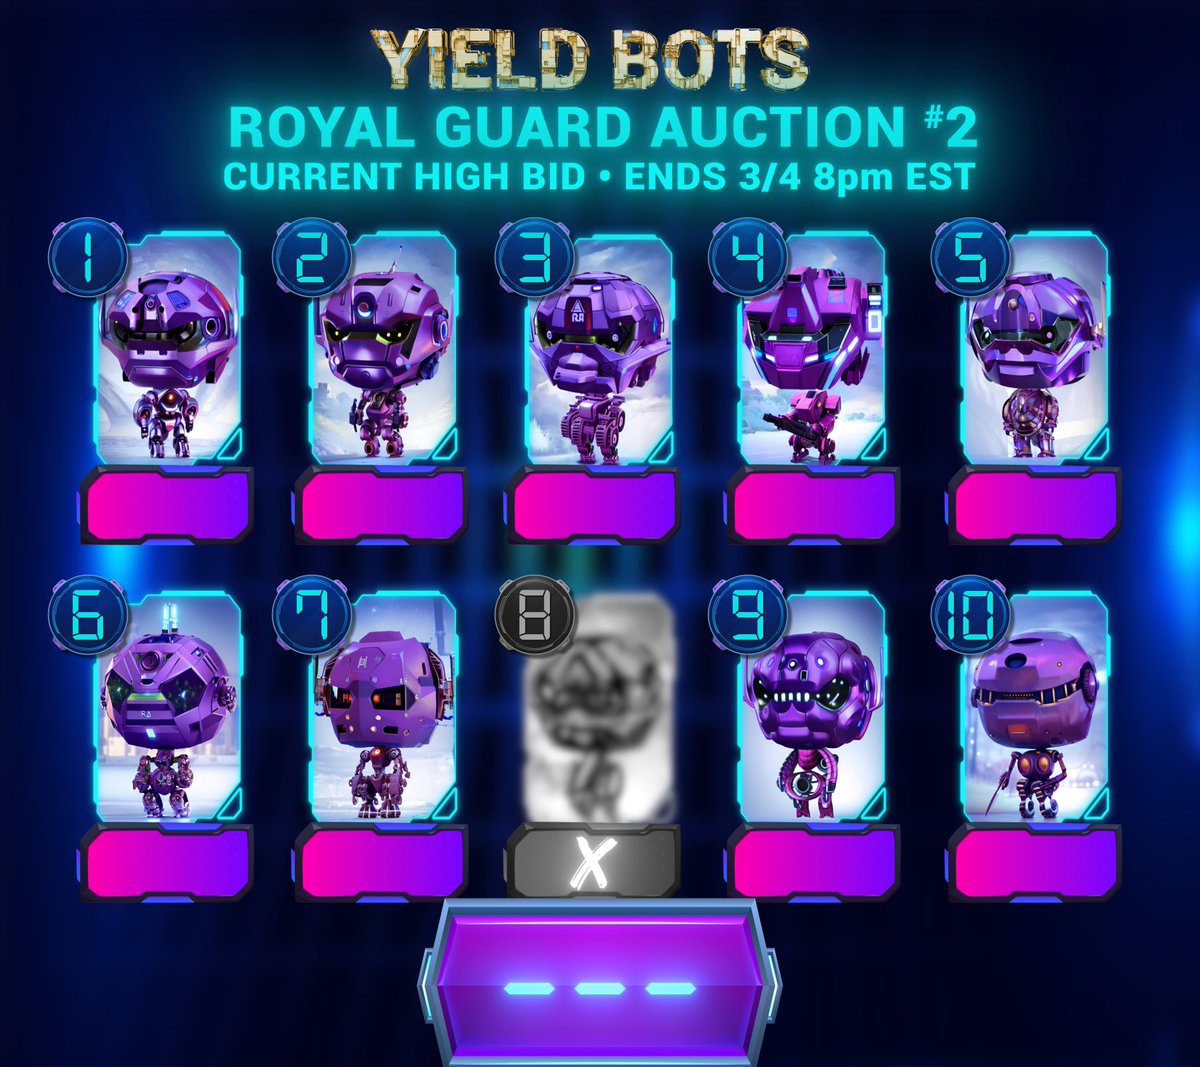 🚨 YieldBot Auction live 🚨 

1 of the 10 Royal Guards to the YieldBot project is up for auction!

Some Royal Guard Perks
- Lead project direction 
- when project supply is capped, RoyalGuards get 10% of supply
- Help from founder in anything web3 that you’re privately pursuing